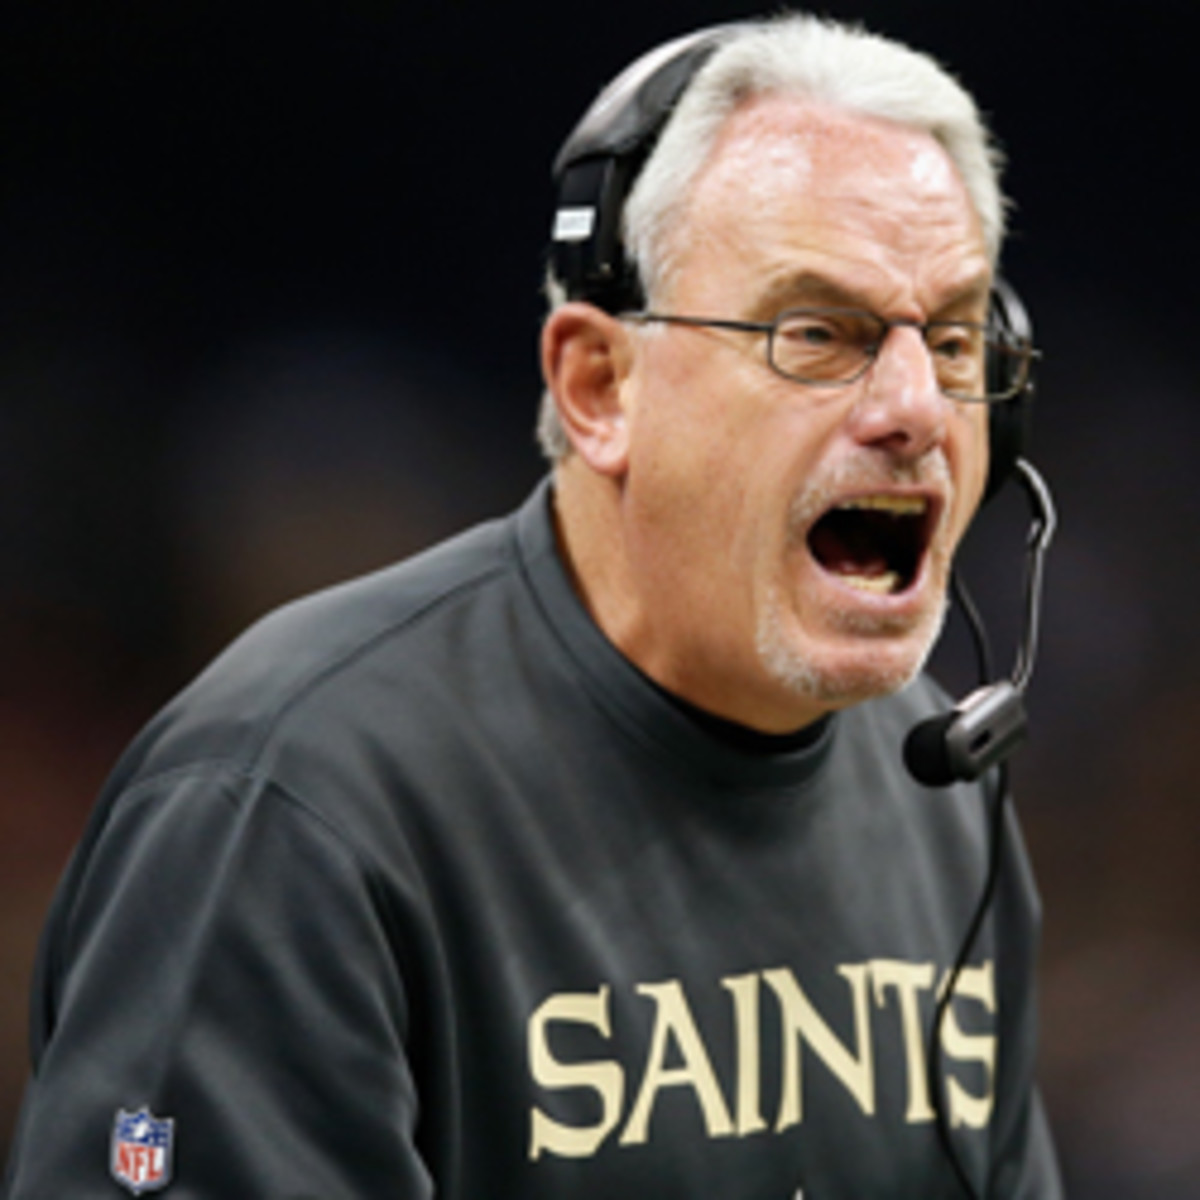 Joe Vitt was critical of the NFL's handling of the Saints' alleged bounty system. (Chris Graythen/Getty Images)